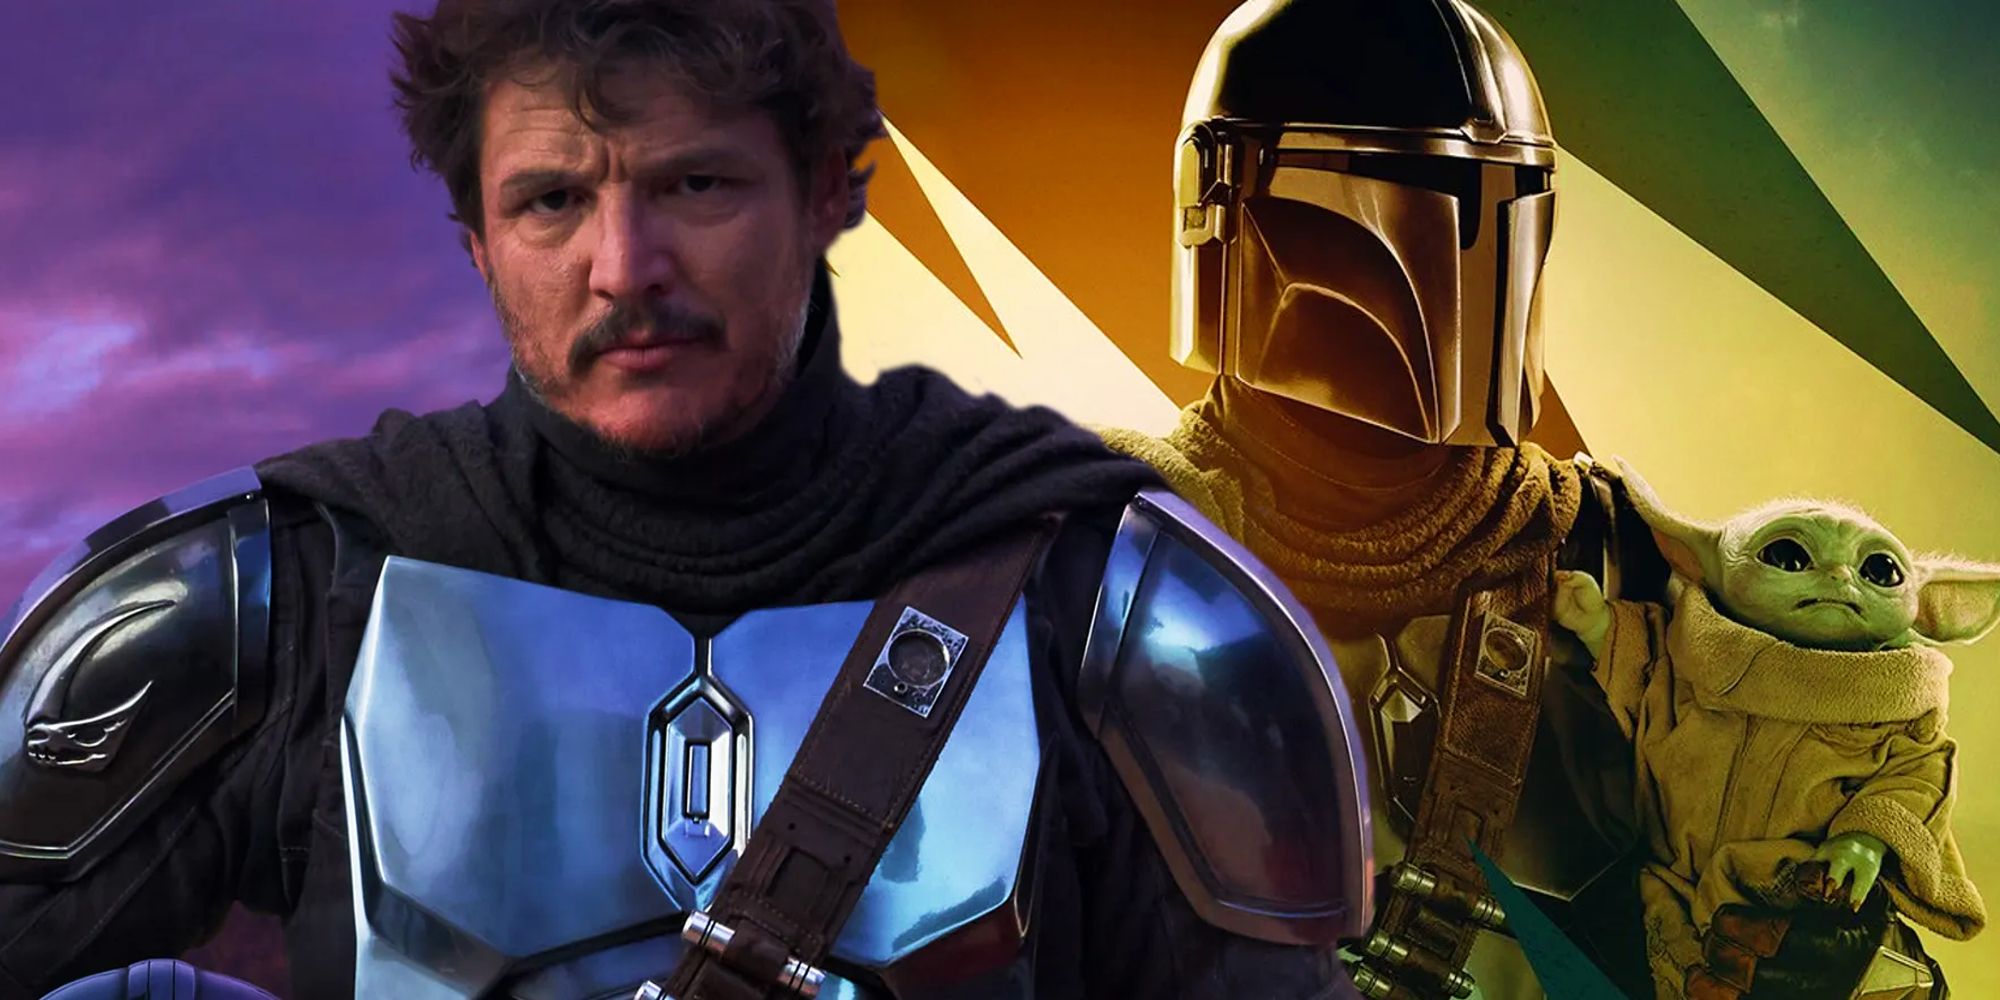 Pedro Pascal as Din Djarin unmasked next to Din's character poster for The Mandalorian season 3